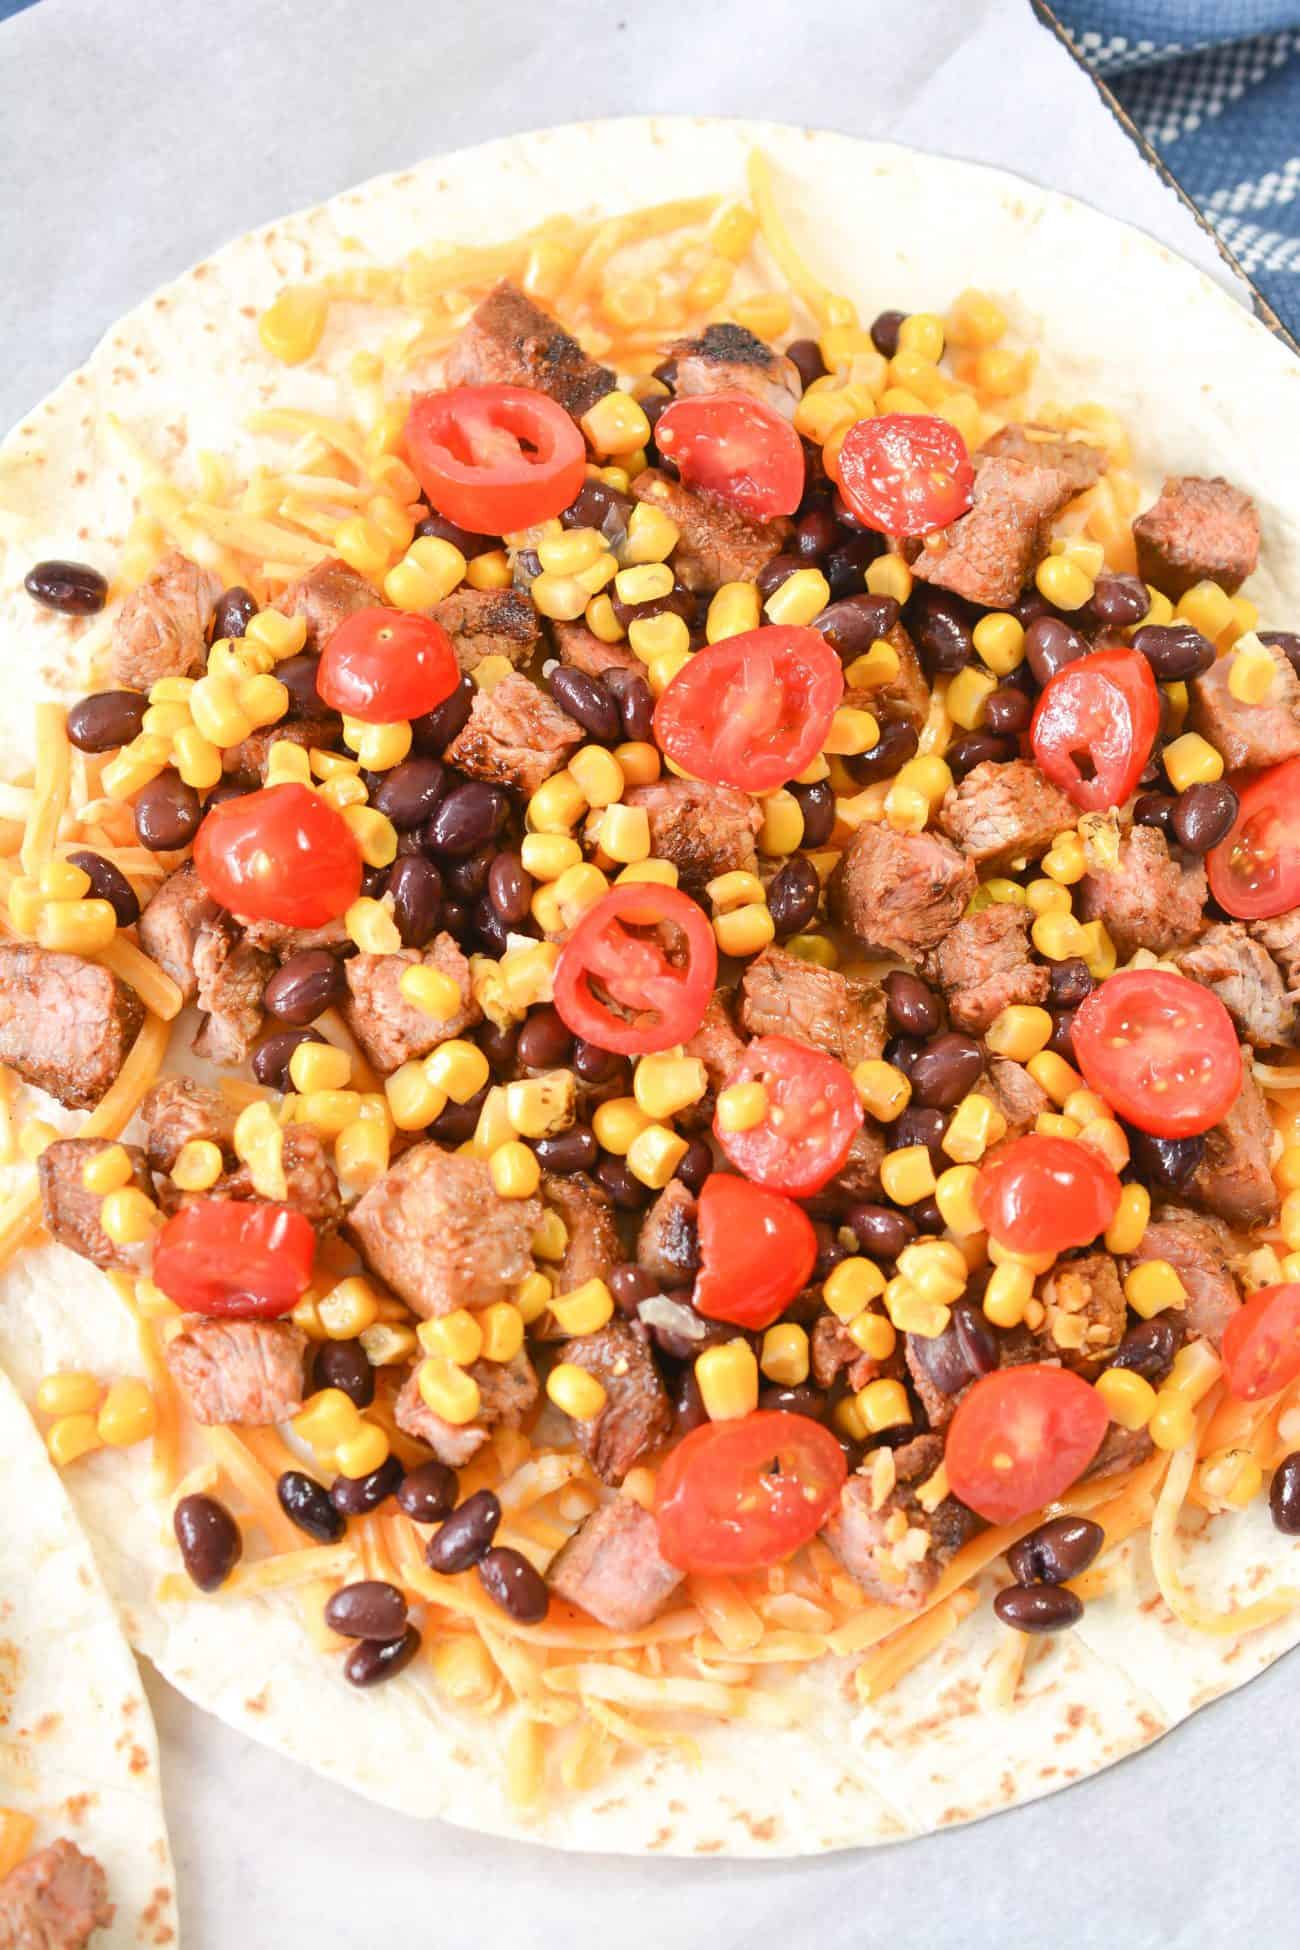 add ½ cup of fire-roasted corn drained and ½ cup of cherry tomatoes sliced.